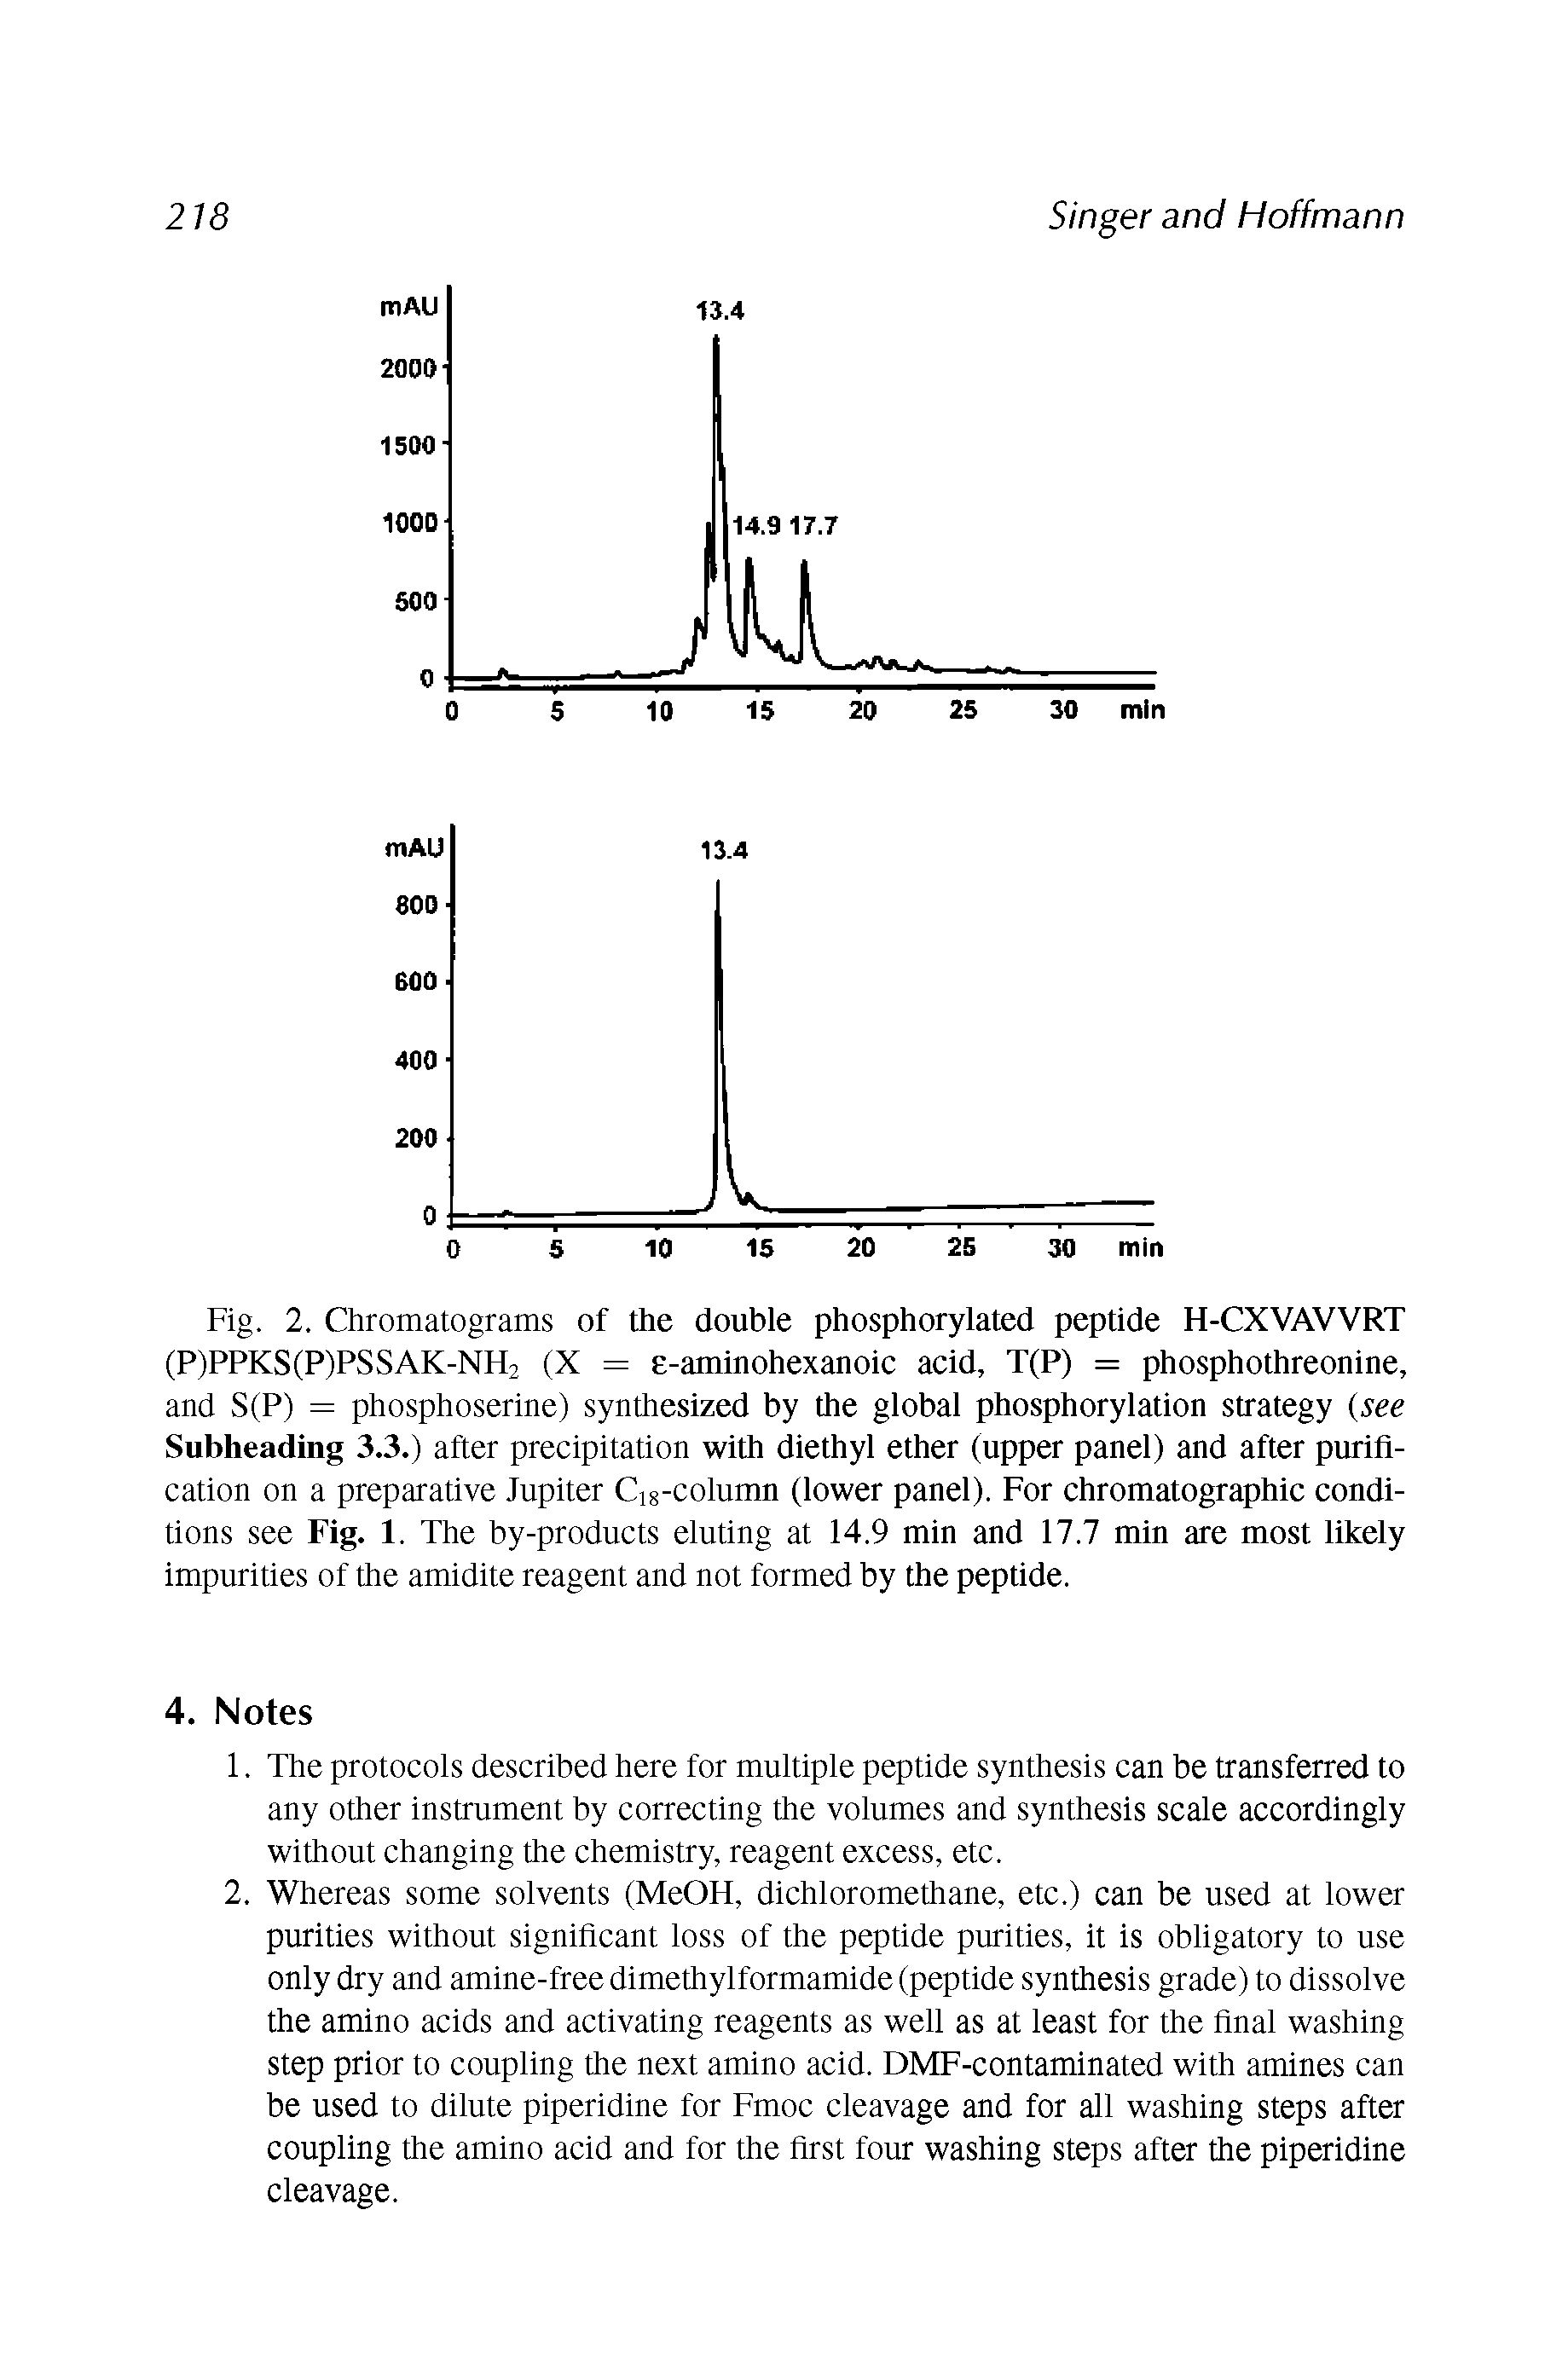 Fig. 2. Chromatograms of the double phosphorylated peptide H-CXVAVVRT (P)PPKS(P)PSSAK-NH2 (X = -aminohexanoic acid, T(P) = phosphothreonine, and S(P) = phosphoserine) synthesized by the global phosphorylation strategy (see Subheading 3.3.) after precipitation with diethyl ether (upper panel) and after purification on a preparative Jupiter Ci8-column (lower panel). For chromatographic conditions see Fig. 1. The by-products eluting at 14.9 min and 17.7 min are most likely impurities of the amidite reagent and not formed by the peptide.